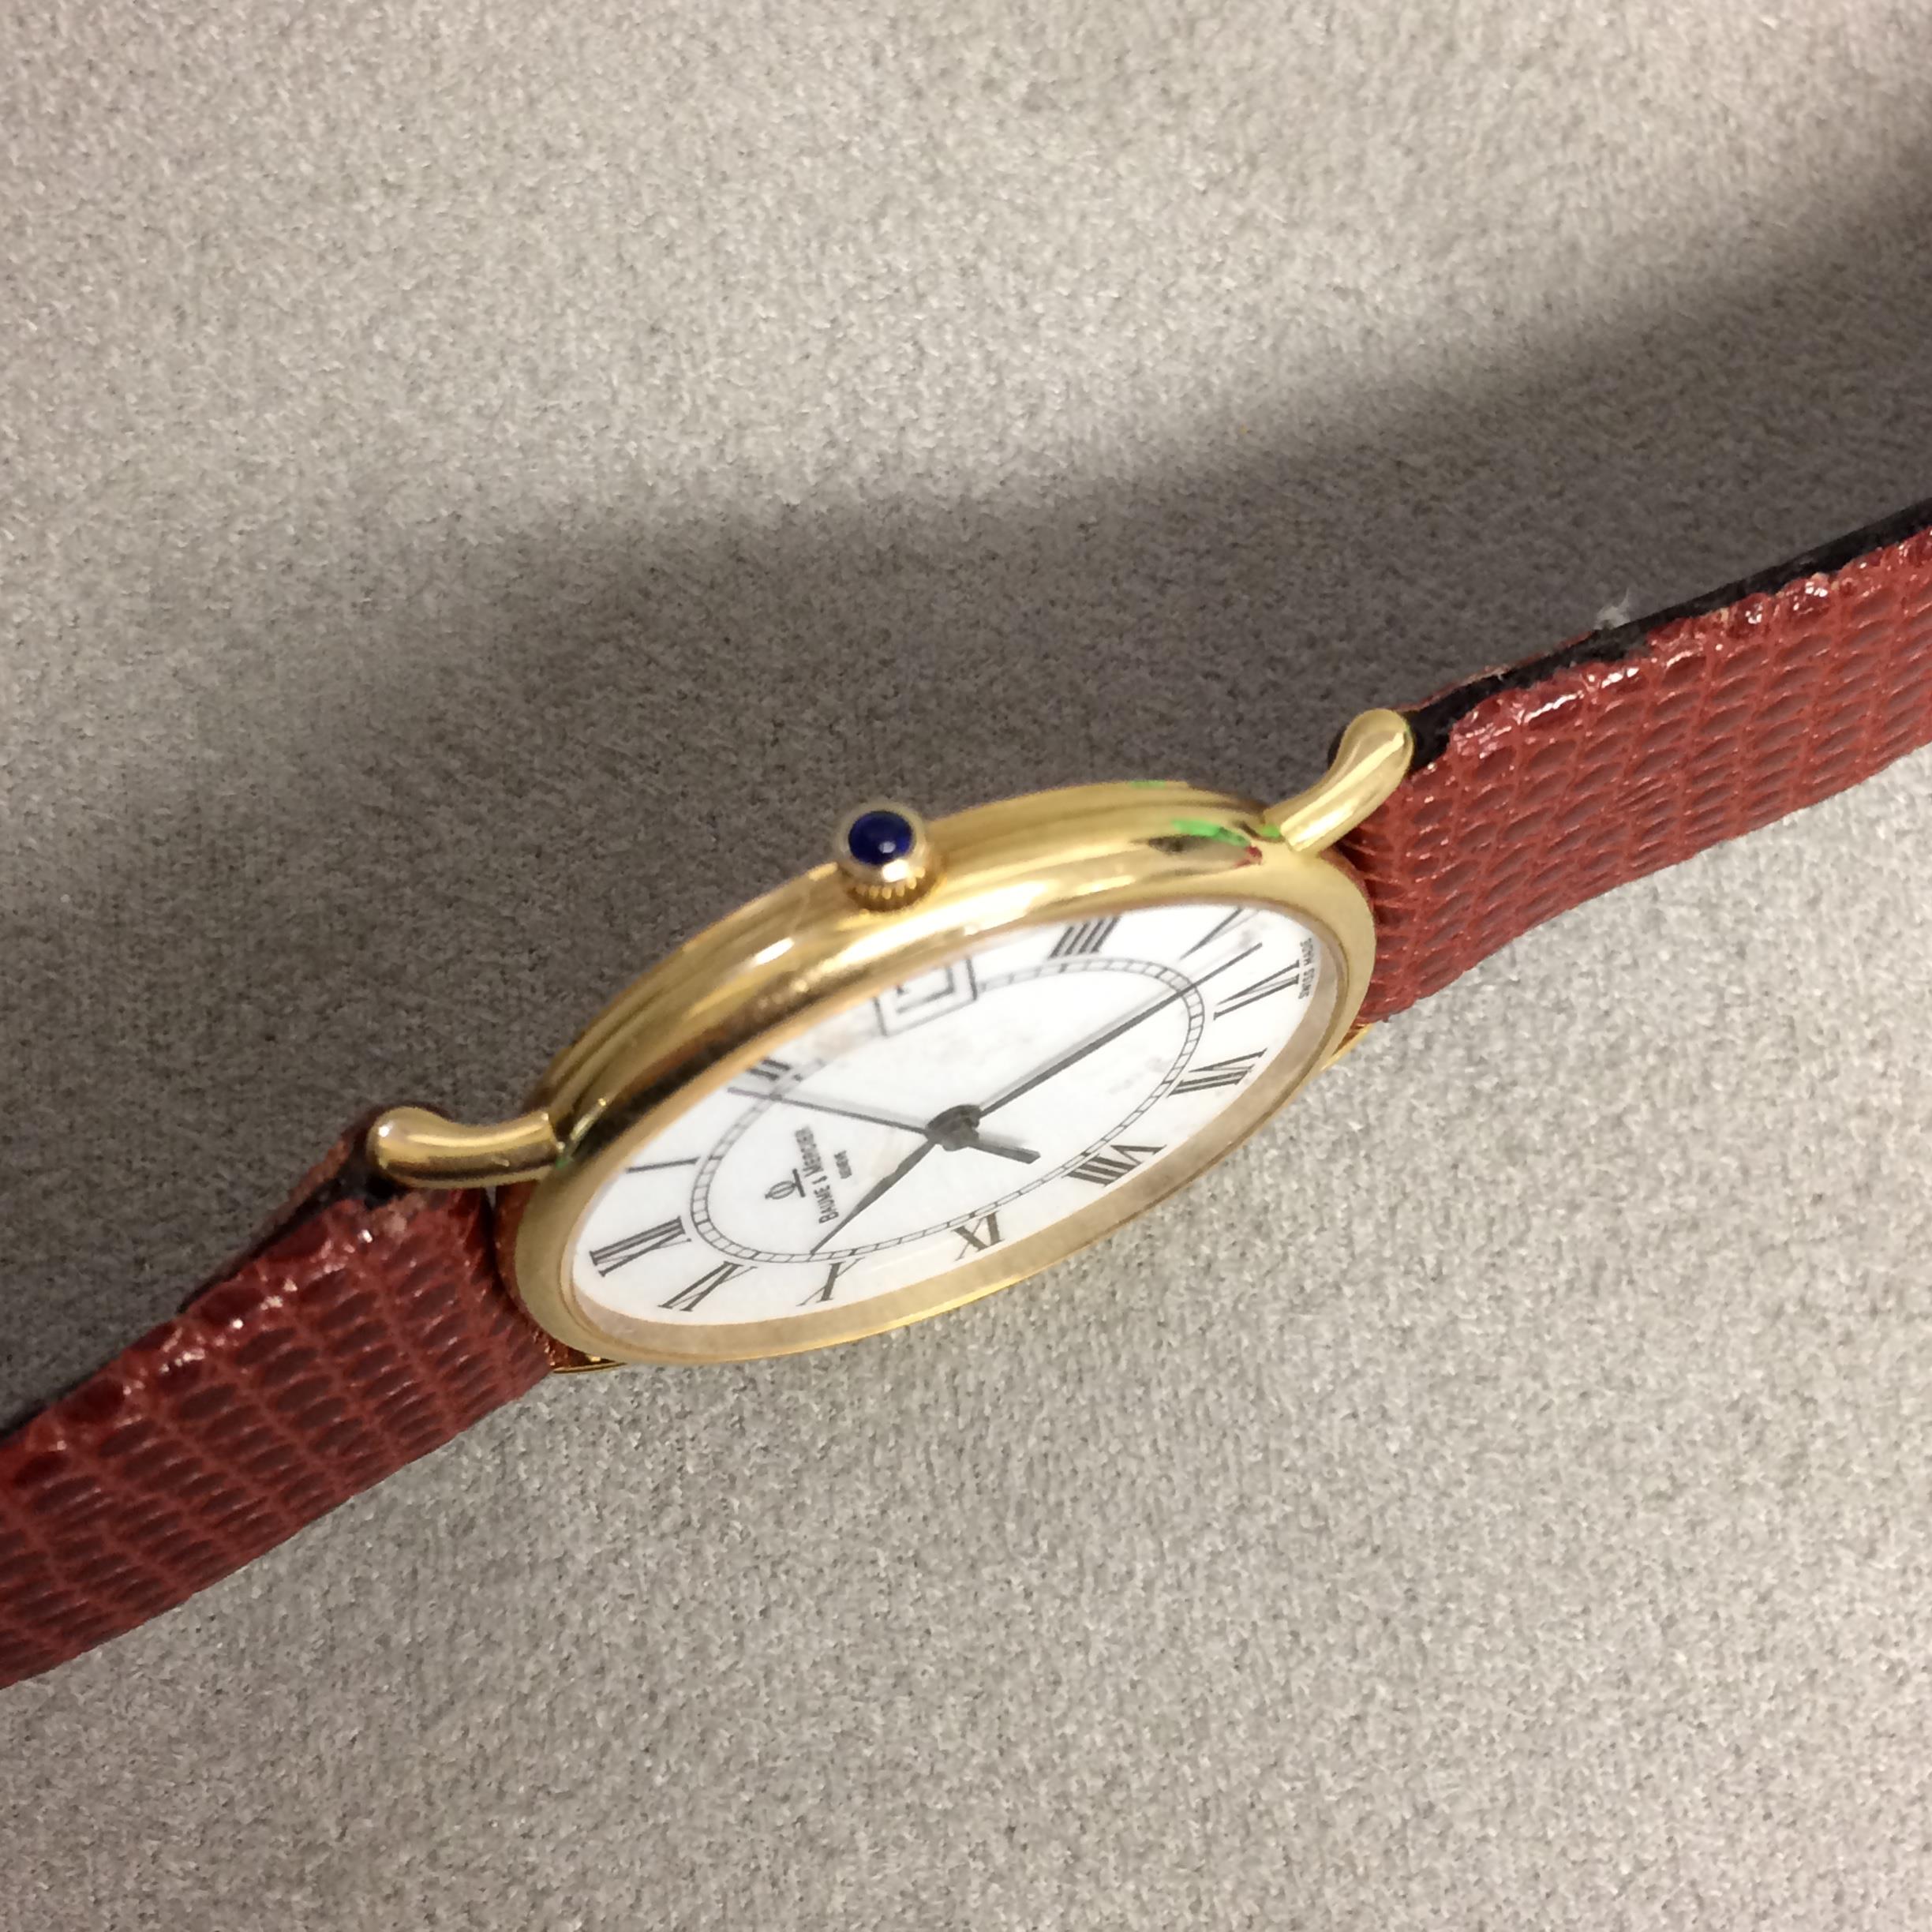 18k gold cased automatic gentleman's wristwatch by Baume and Mercier, 30 mm case with white face and - Image 3 of 4